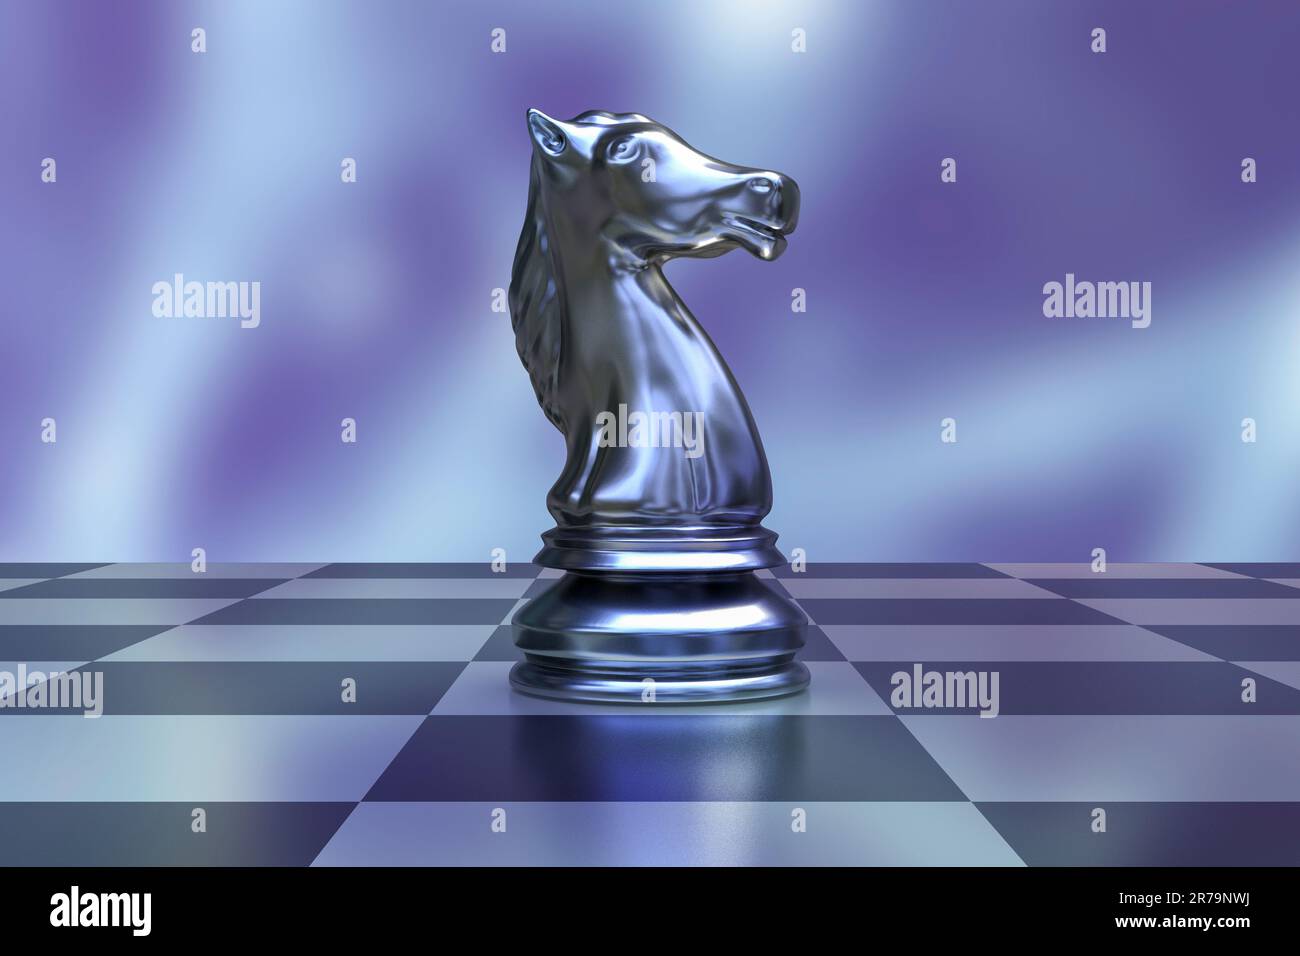 chess board-High Quality HD Wallpaper Preview